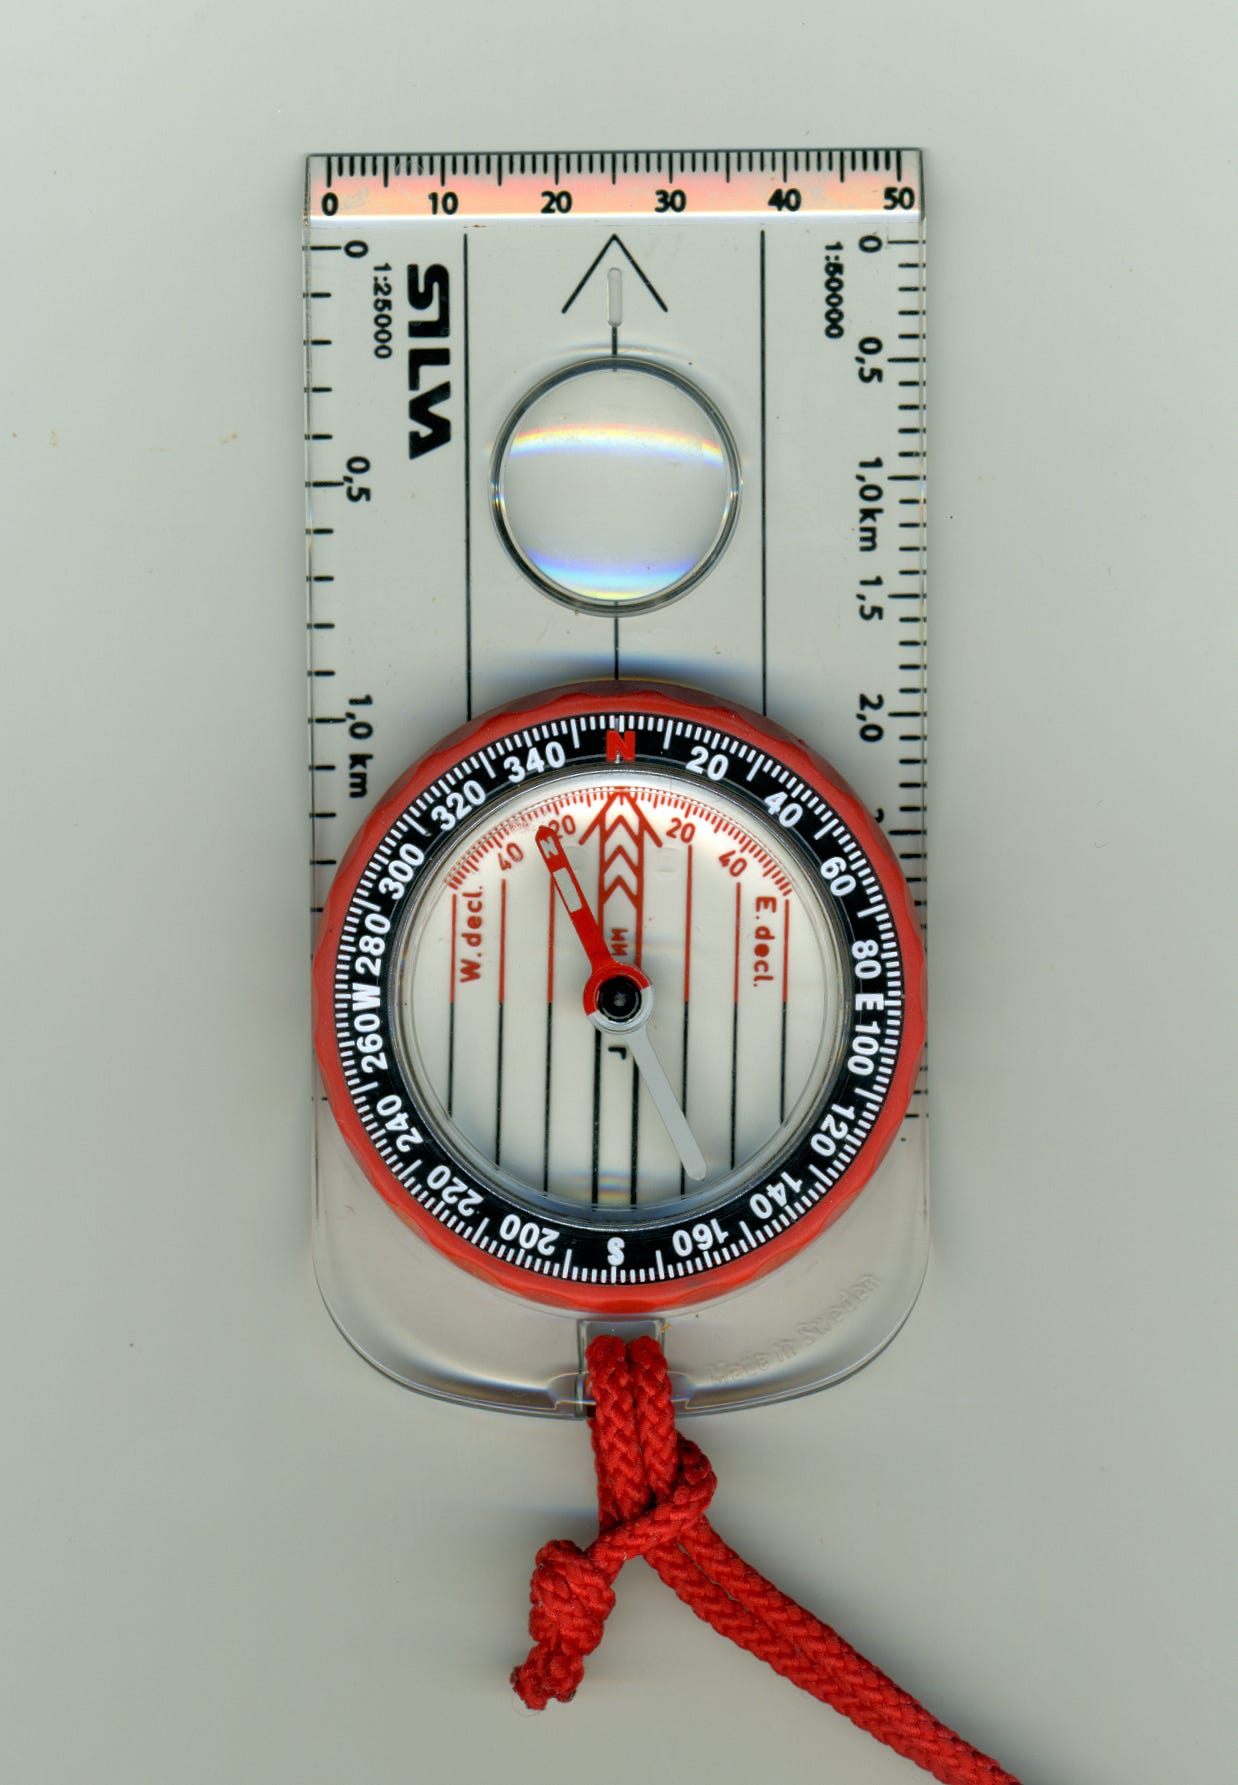 A picture of a compass; a orange cord is tied to one end. The dial and compass arrow are a reddish orange color. The compass is transparent but has markings and rulers on the sides.